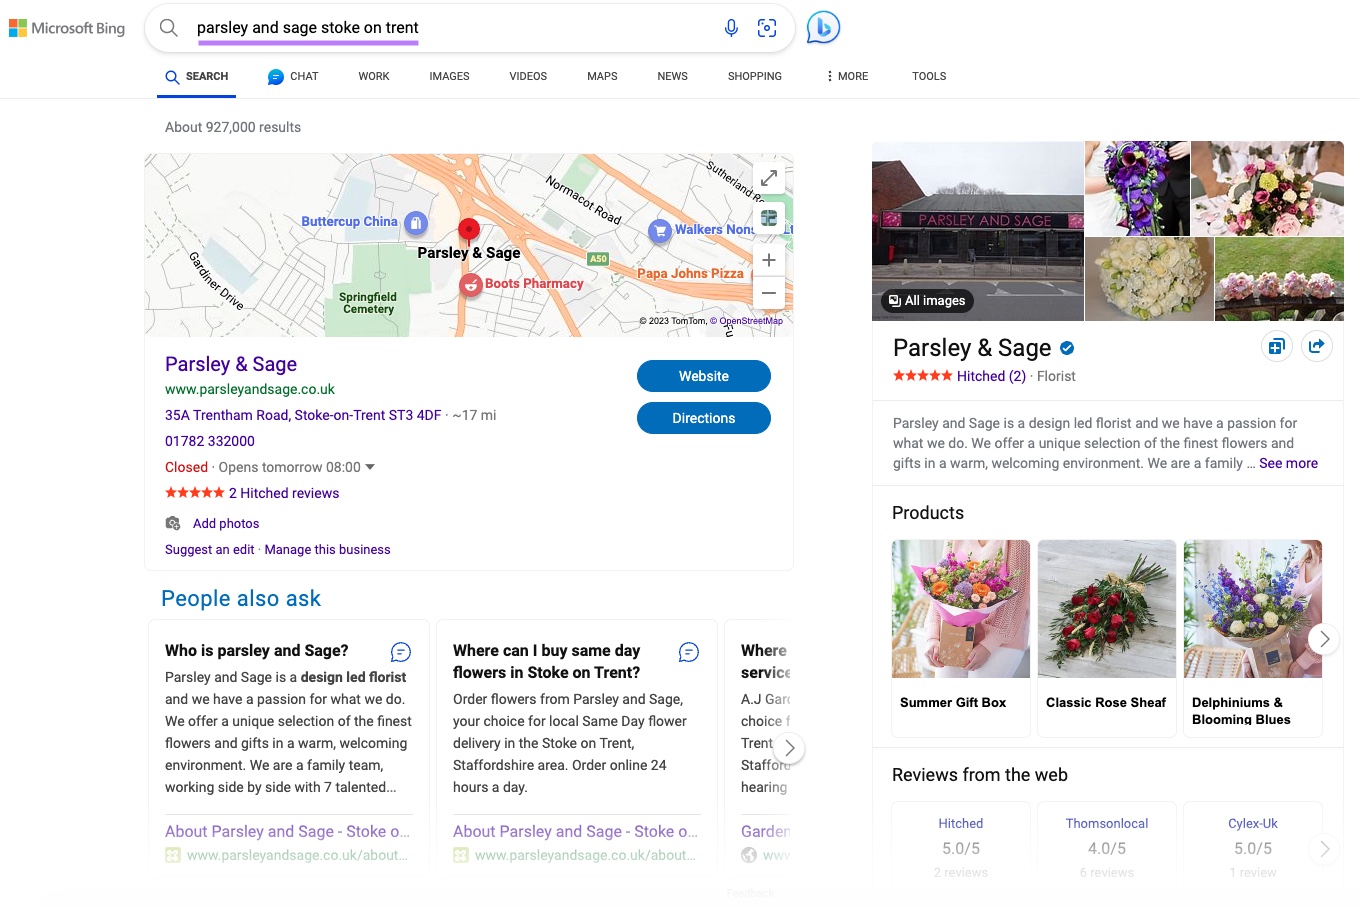 Parsley & Sage on Bing search results and Maps